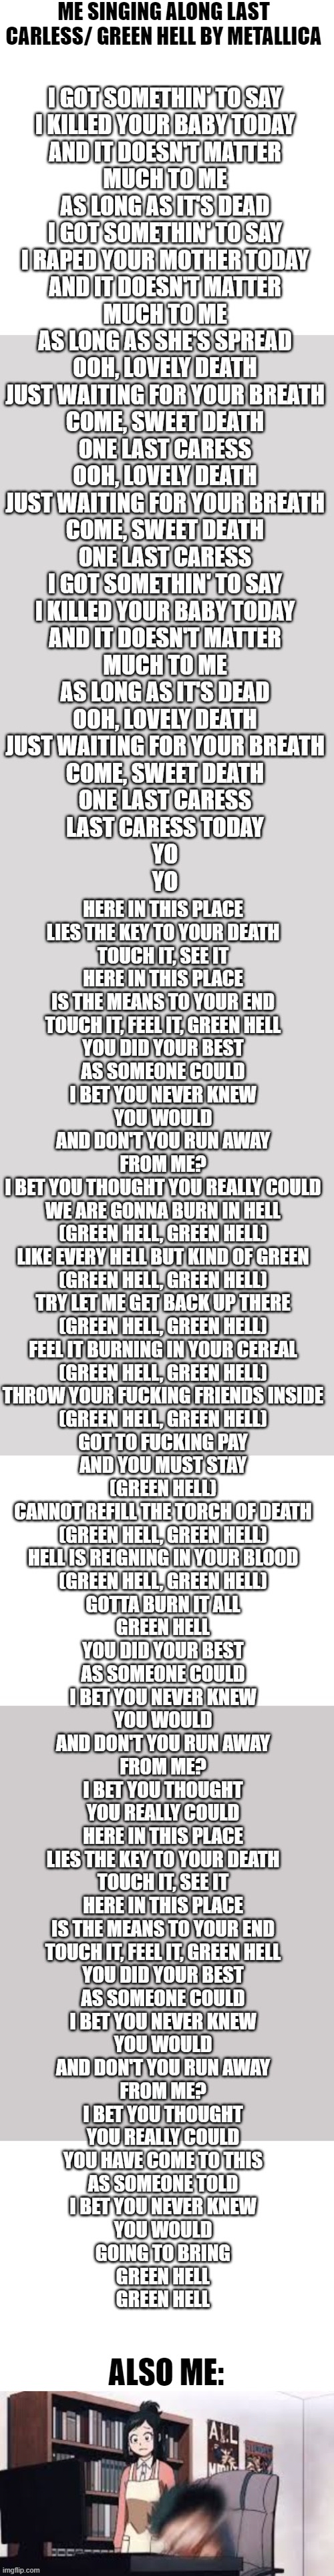 Last Careless/ Green Hell | ME SINGING ALONG LAST CARLESS/ GREEN HELL BY METALLICA; ALSO ME: | image tagged in blank white template | made w/ Imgflip meme maker